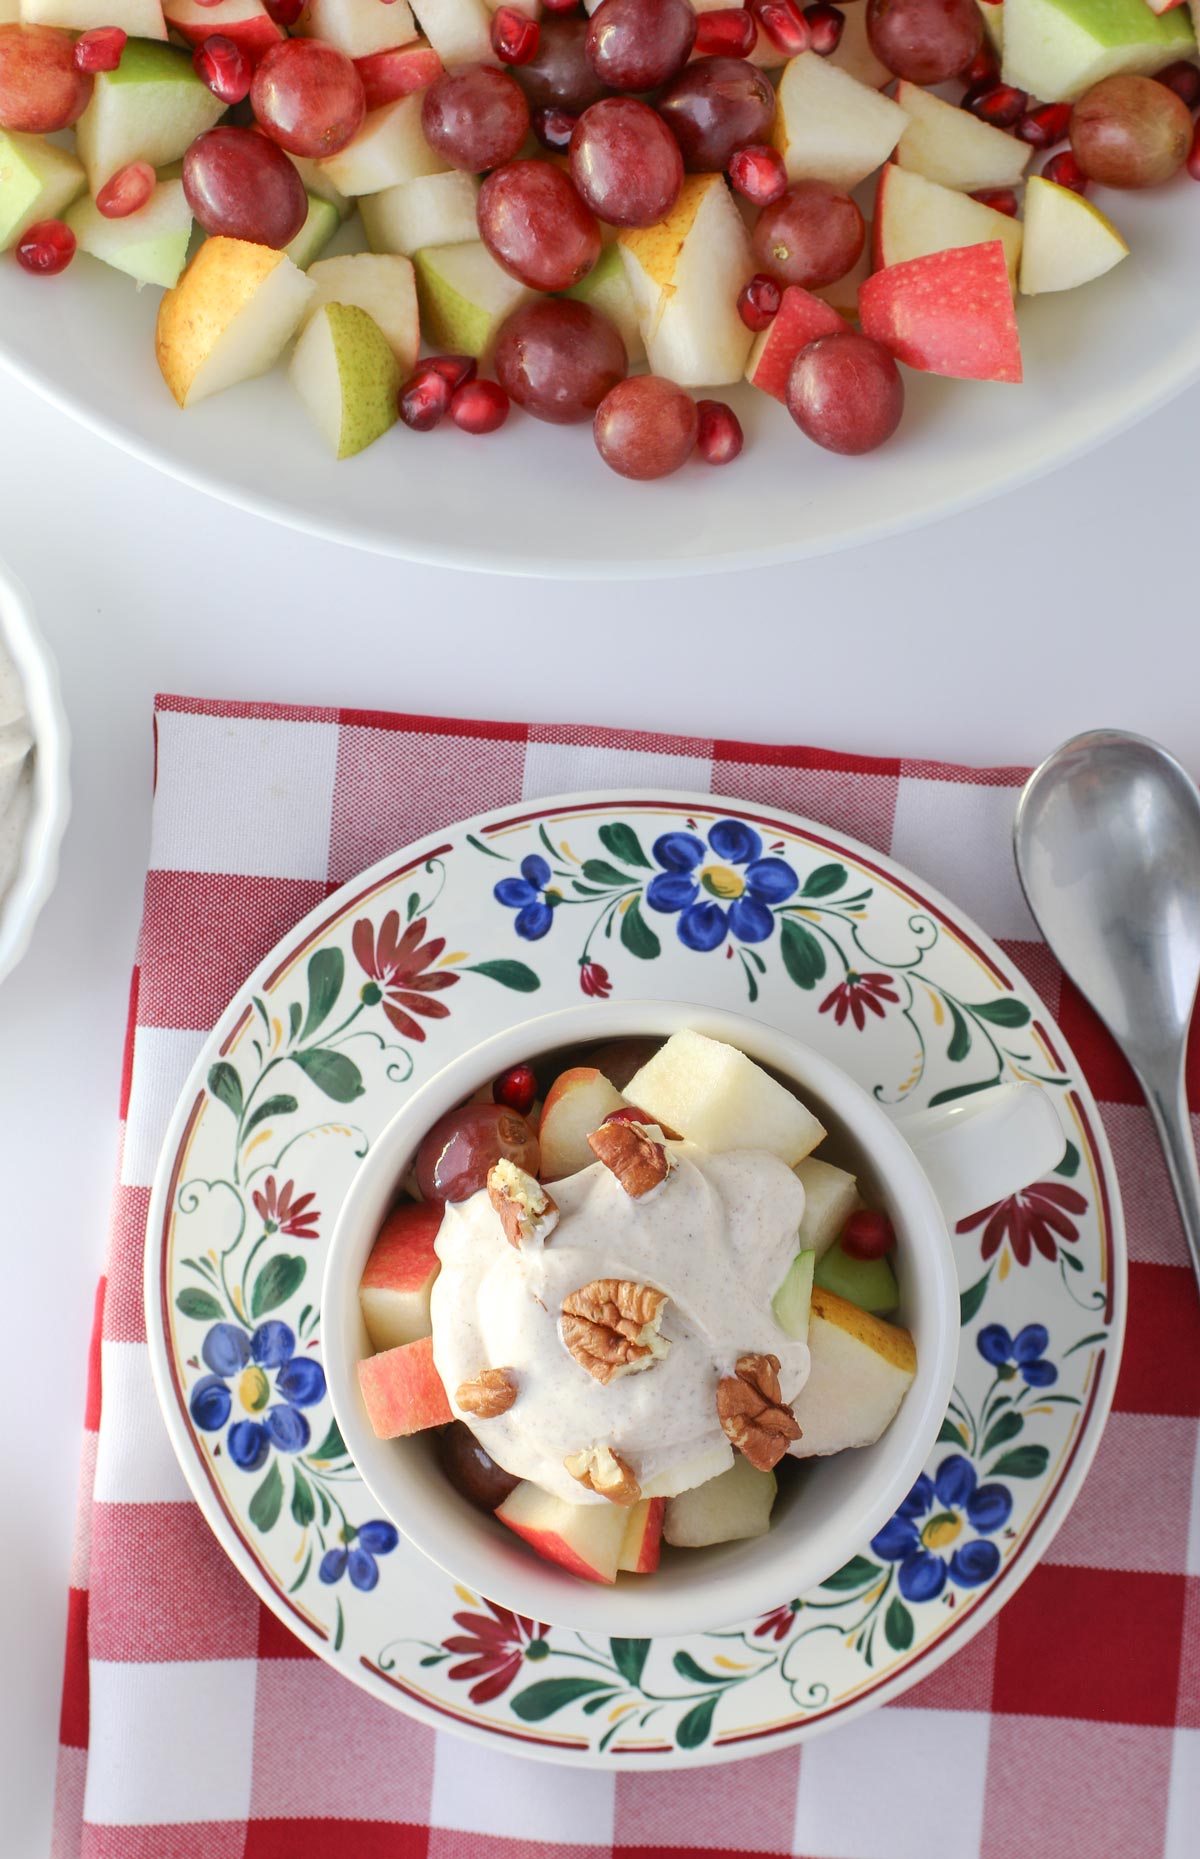 Thanksgiving fruit salad in a tea cup, topped with yogurt dip and chopped nuts.